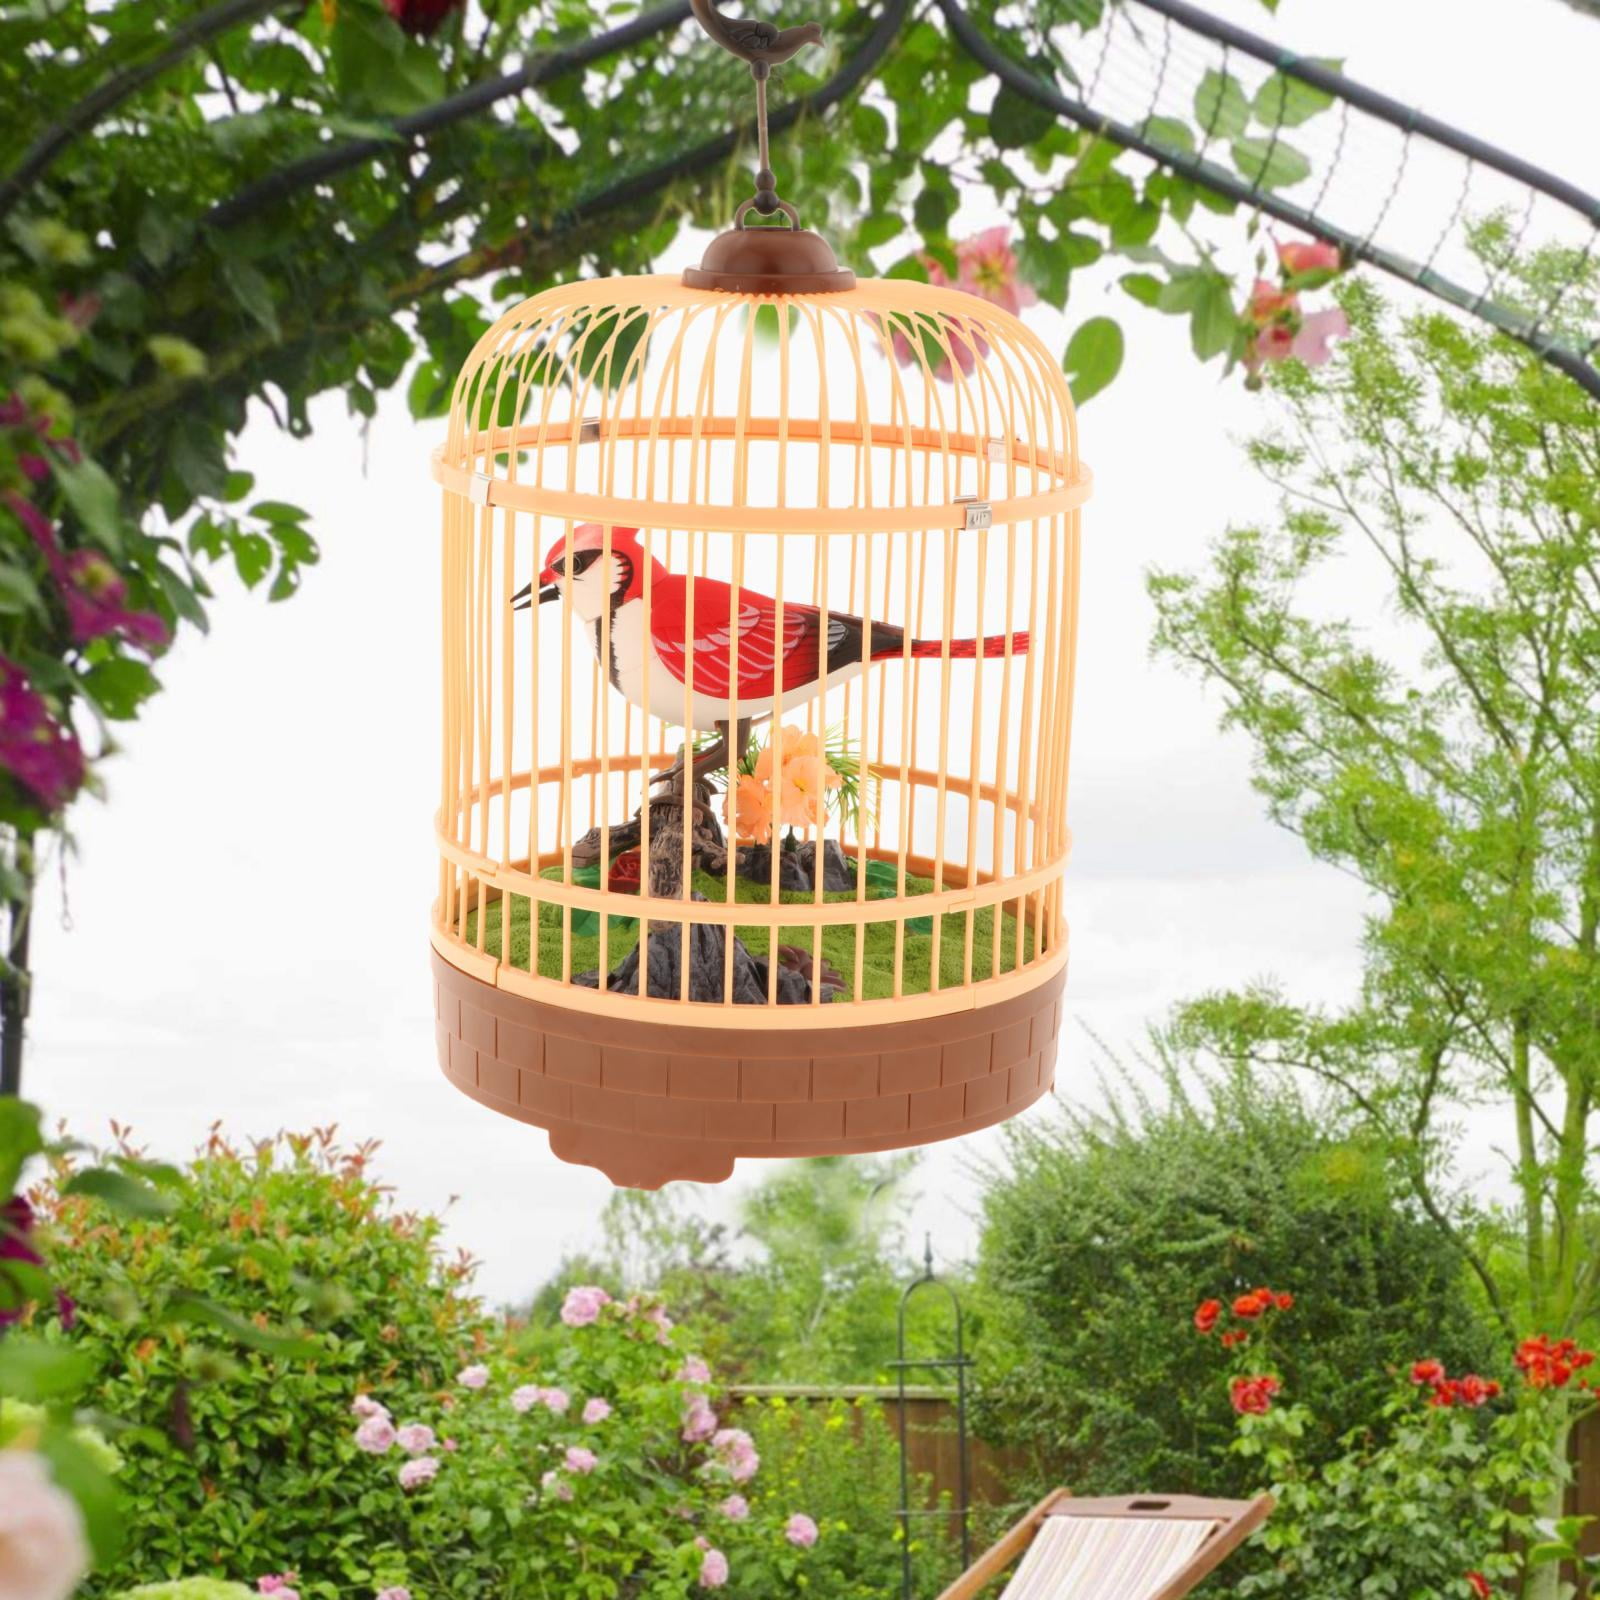 Details about   Beautiful Decoration Singing & Chirping Bird Cage Realistic Sounds & Movements 